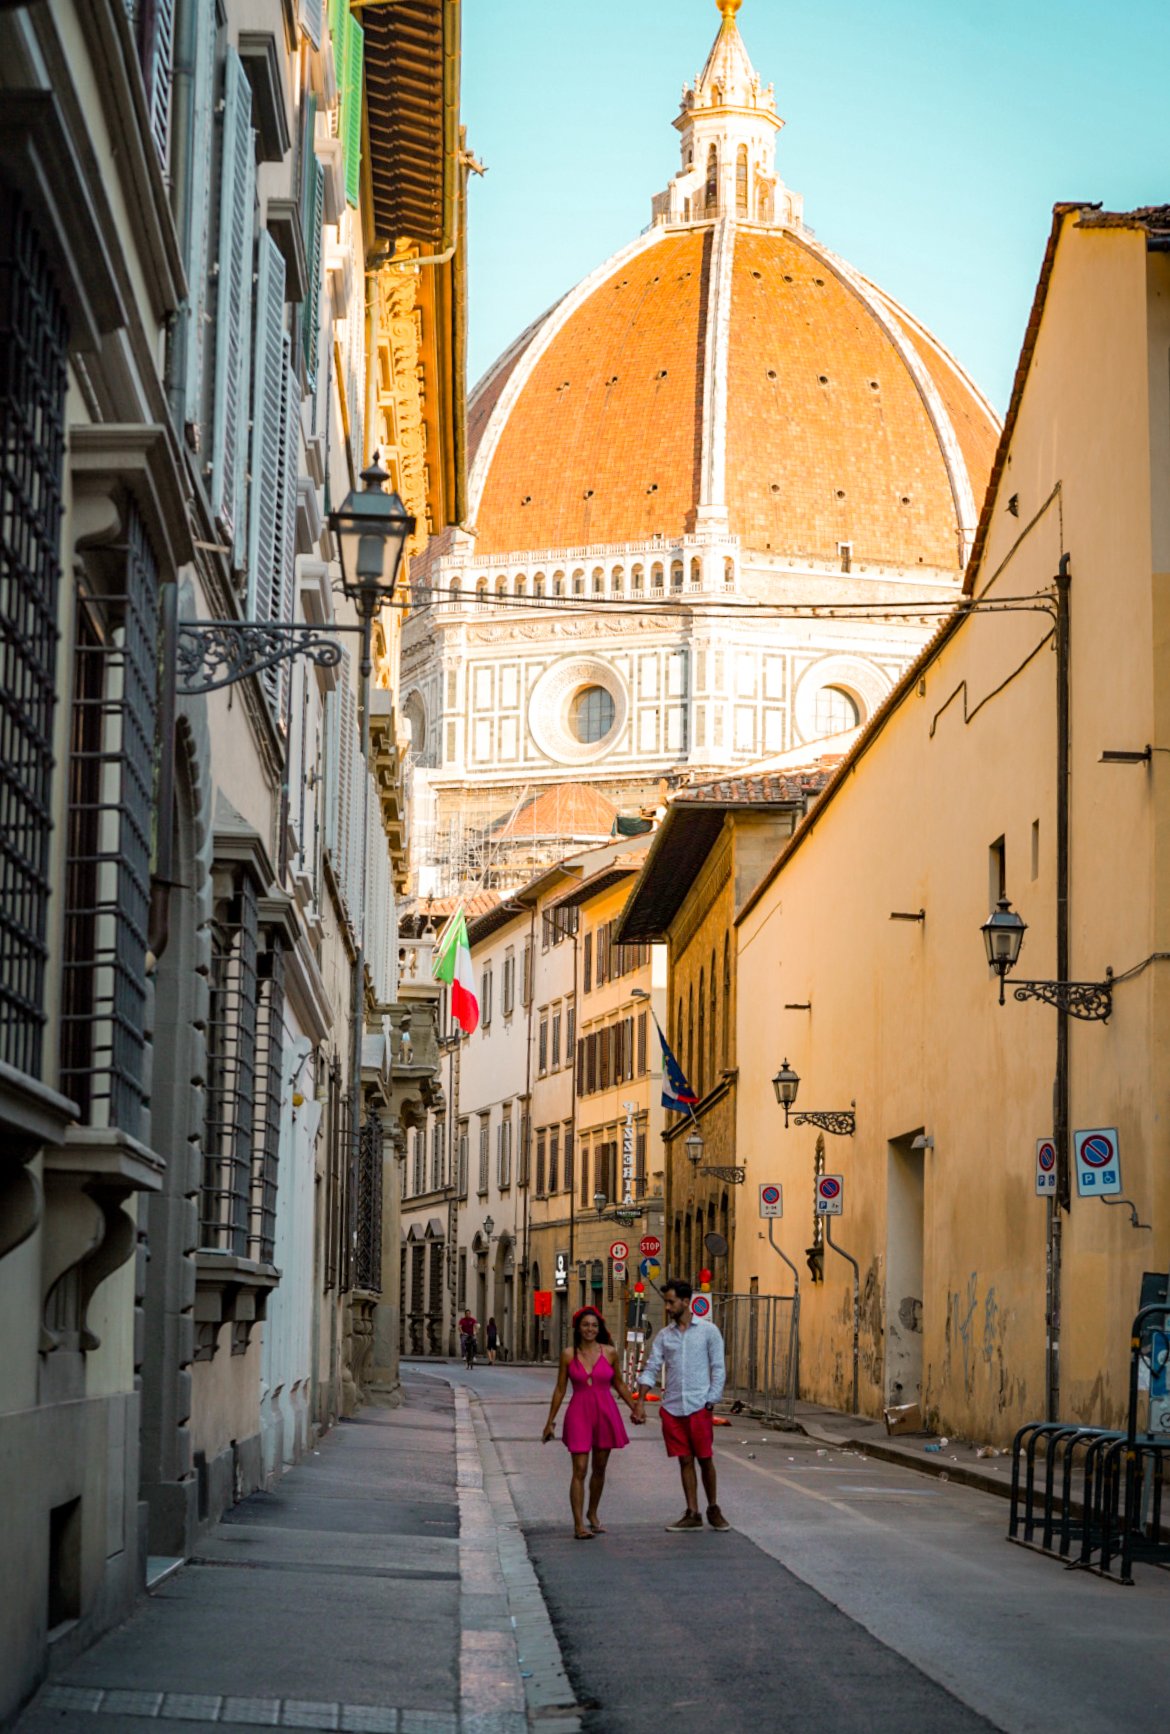 Things to see in Florence, Italy